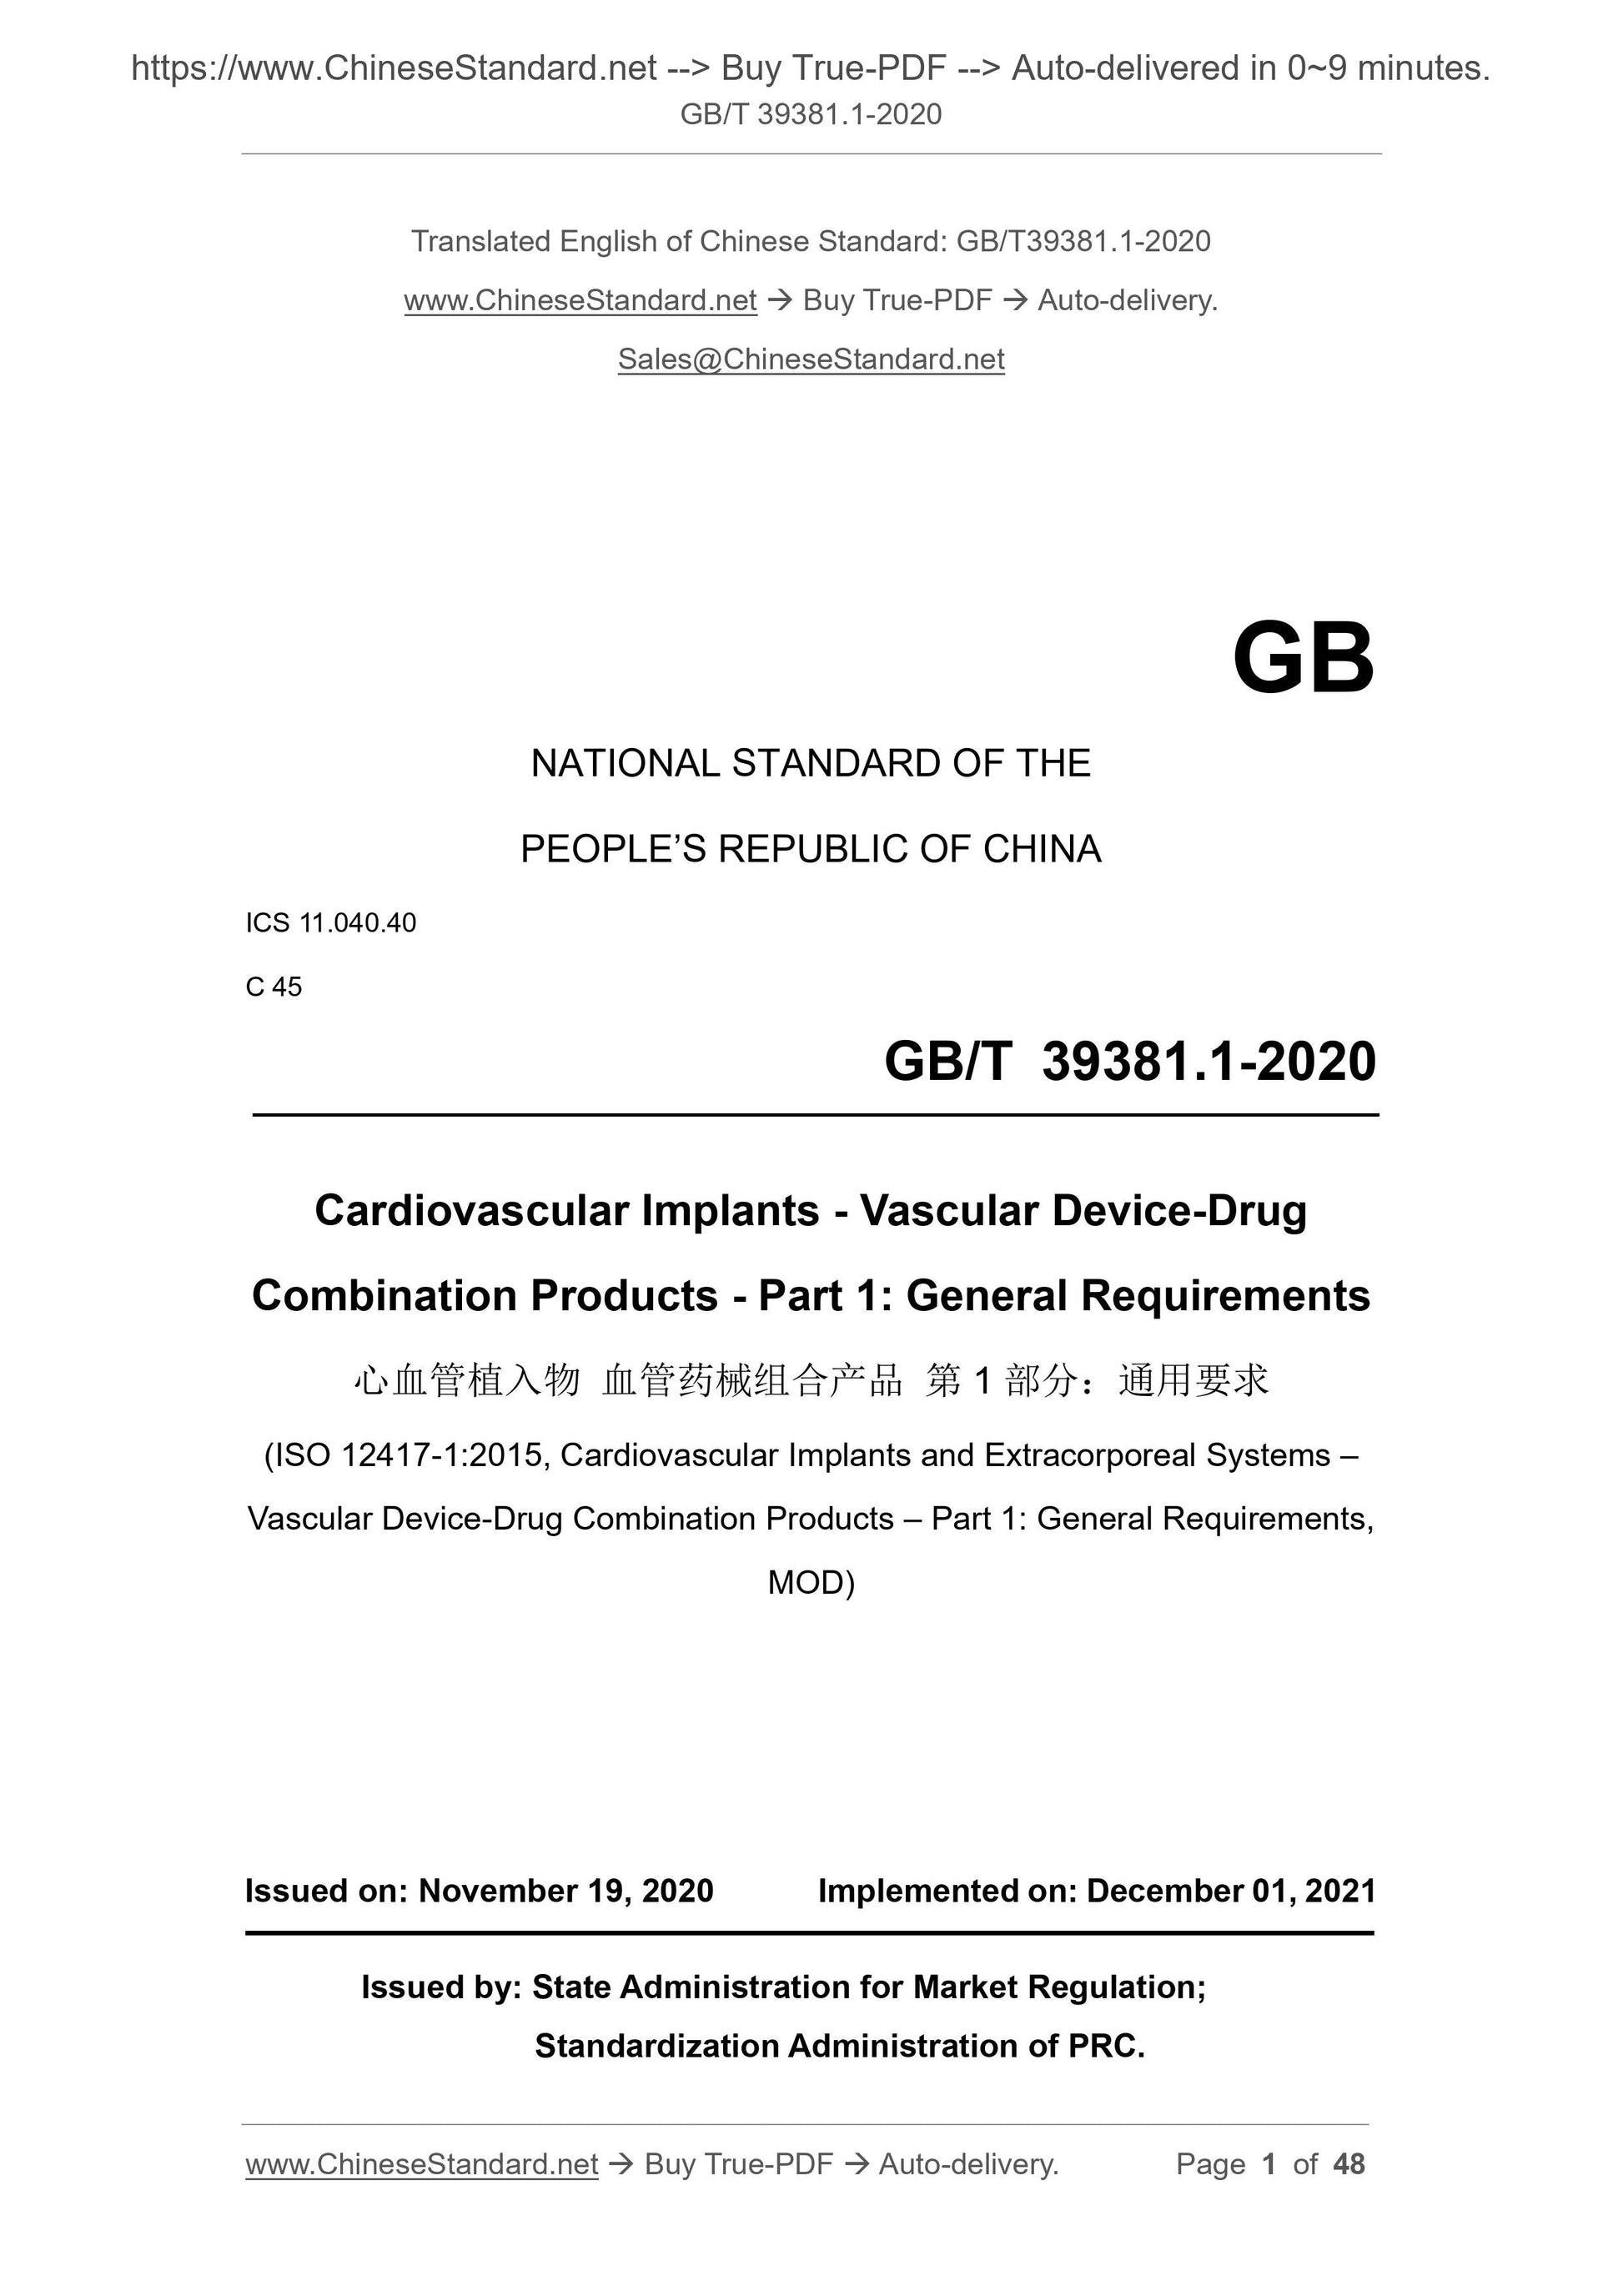 GB/T 39381.1-2020 Page 1